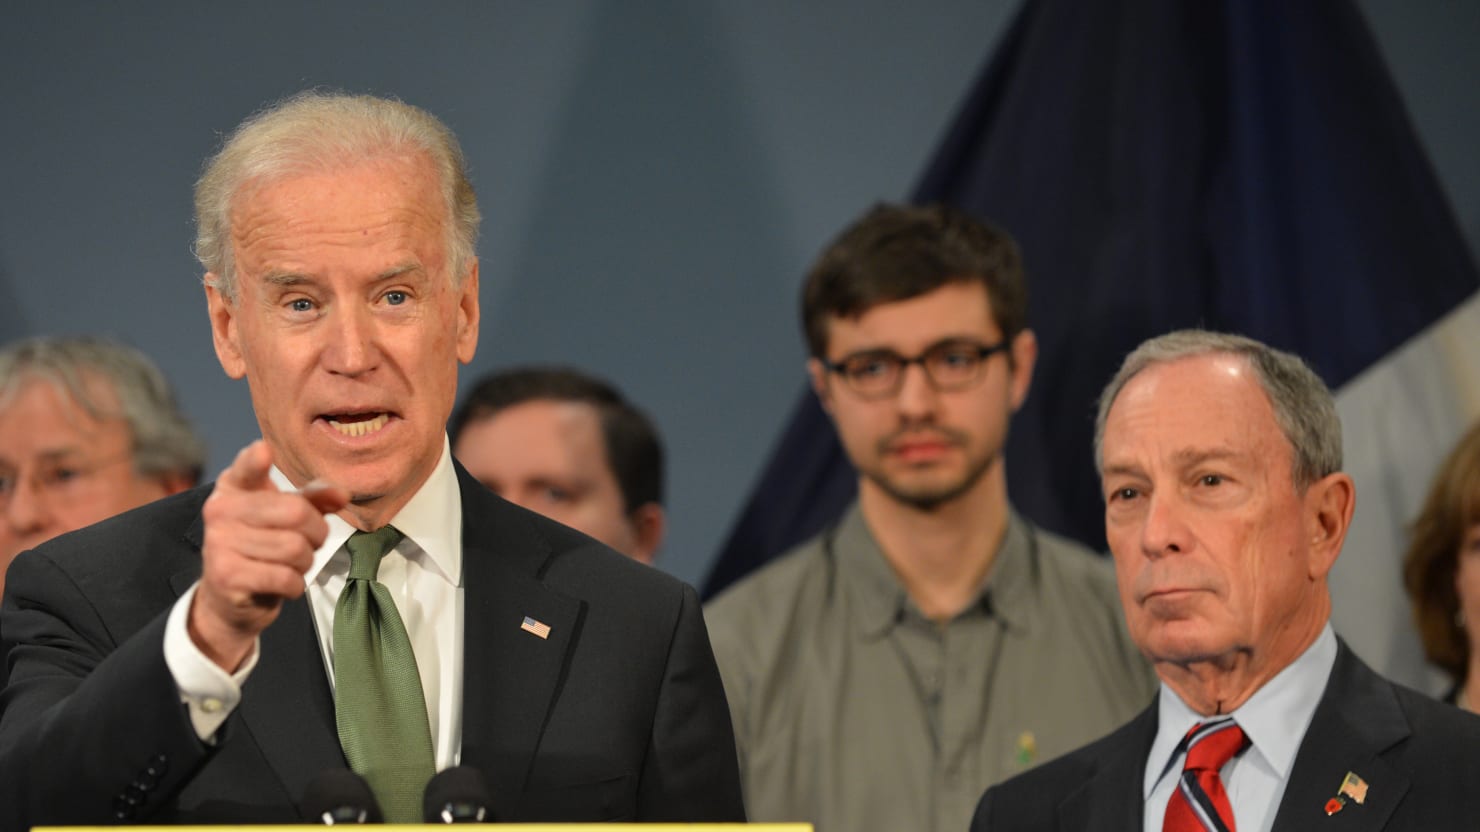 Biden Allies Have Already Started Grumbling About Bloomberg